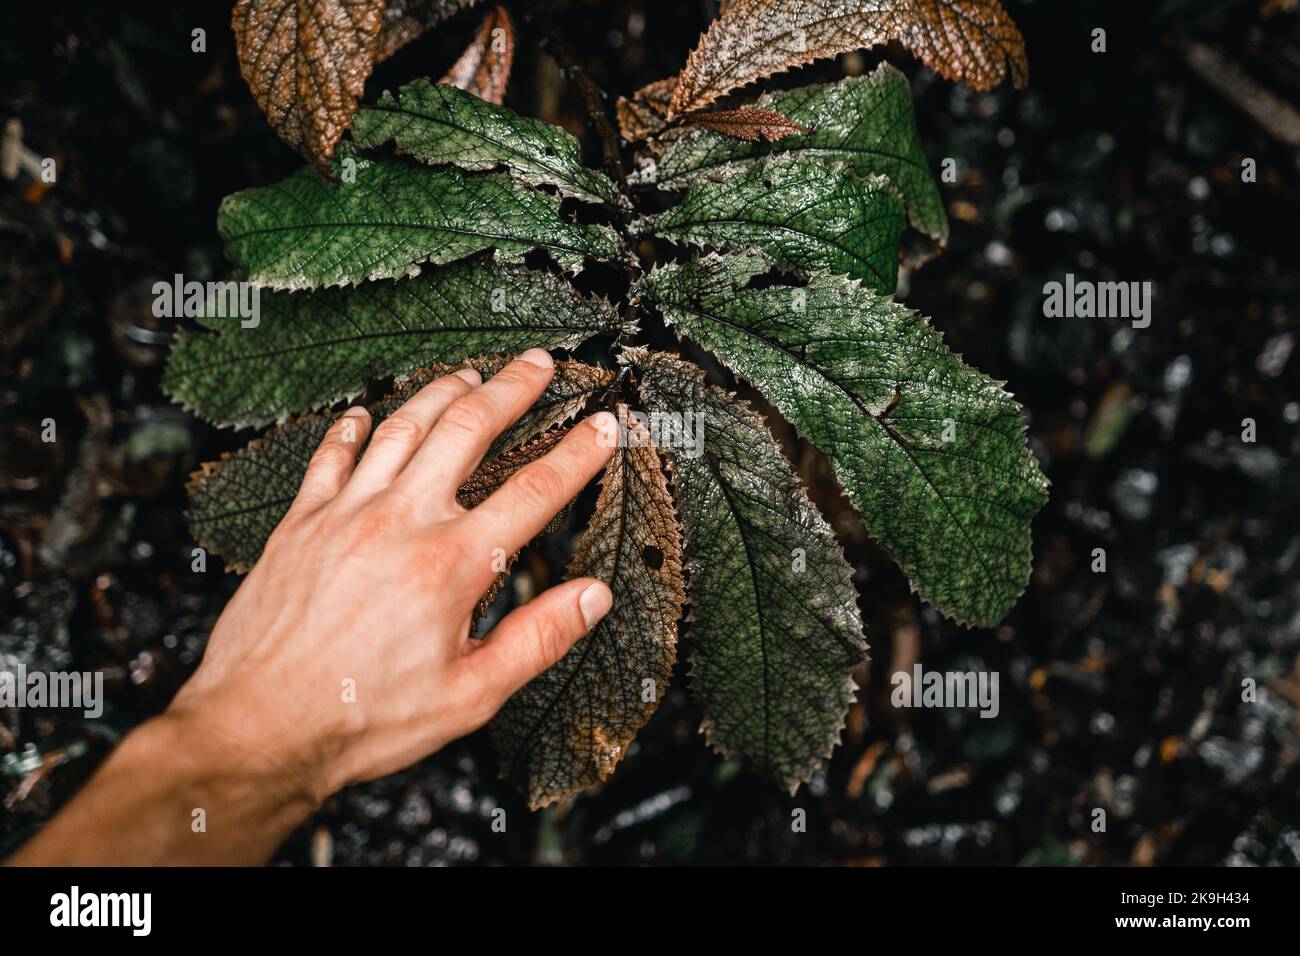 left hand of a young caucasian man carefully stroking the large green pointed leaves of an exotic forest plant on waitawheta tramway, new zealand Stock Photo